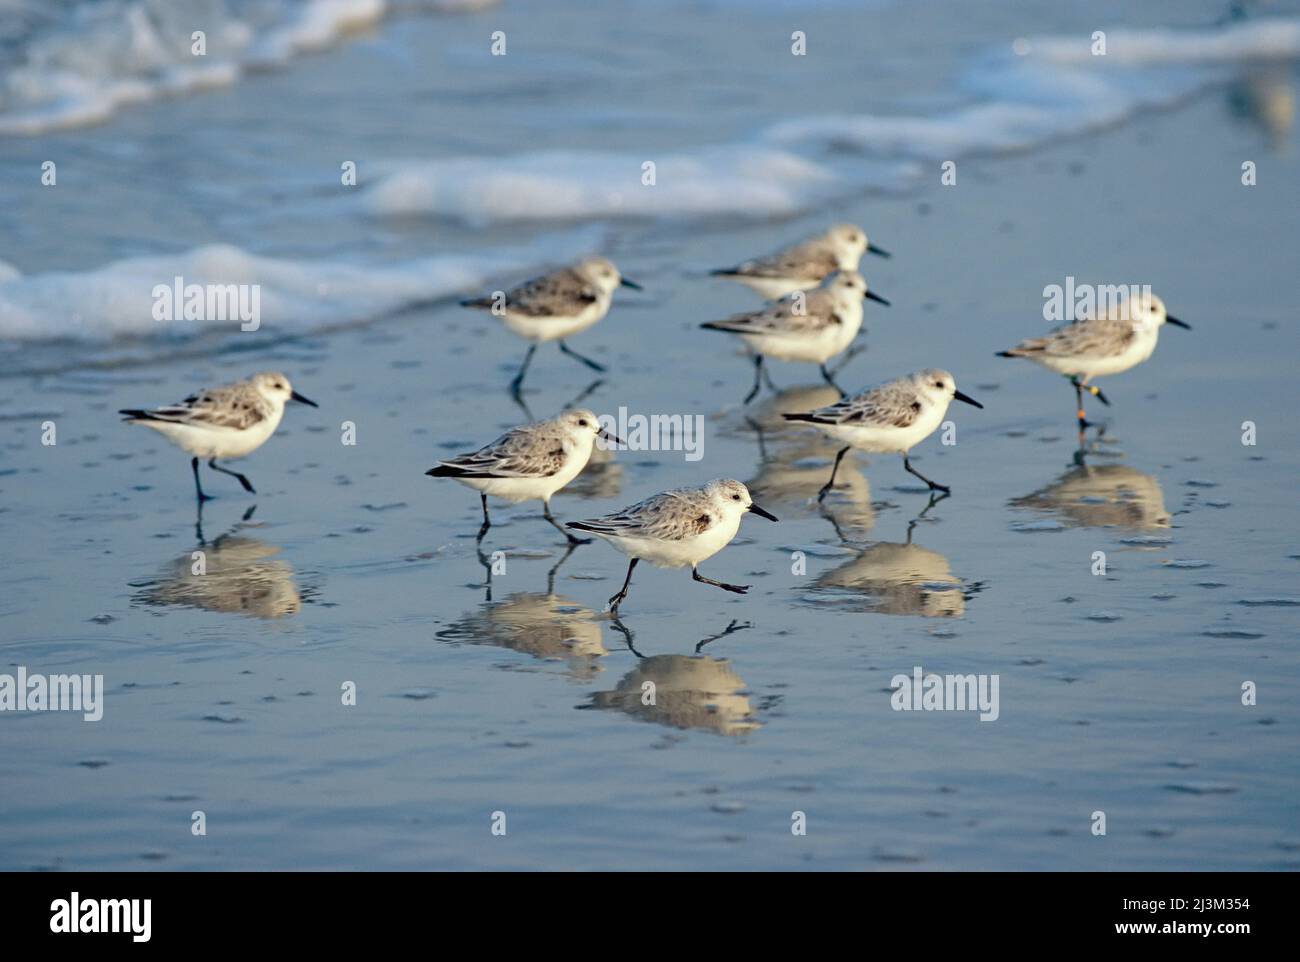 The breaking surf chases a group of sanderlings over a Maryland beach.; Maryland. Stock Photo